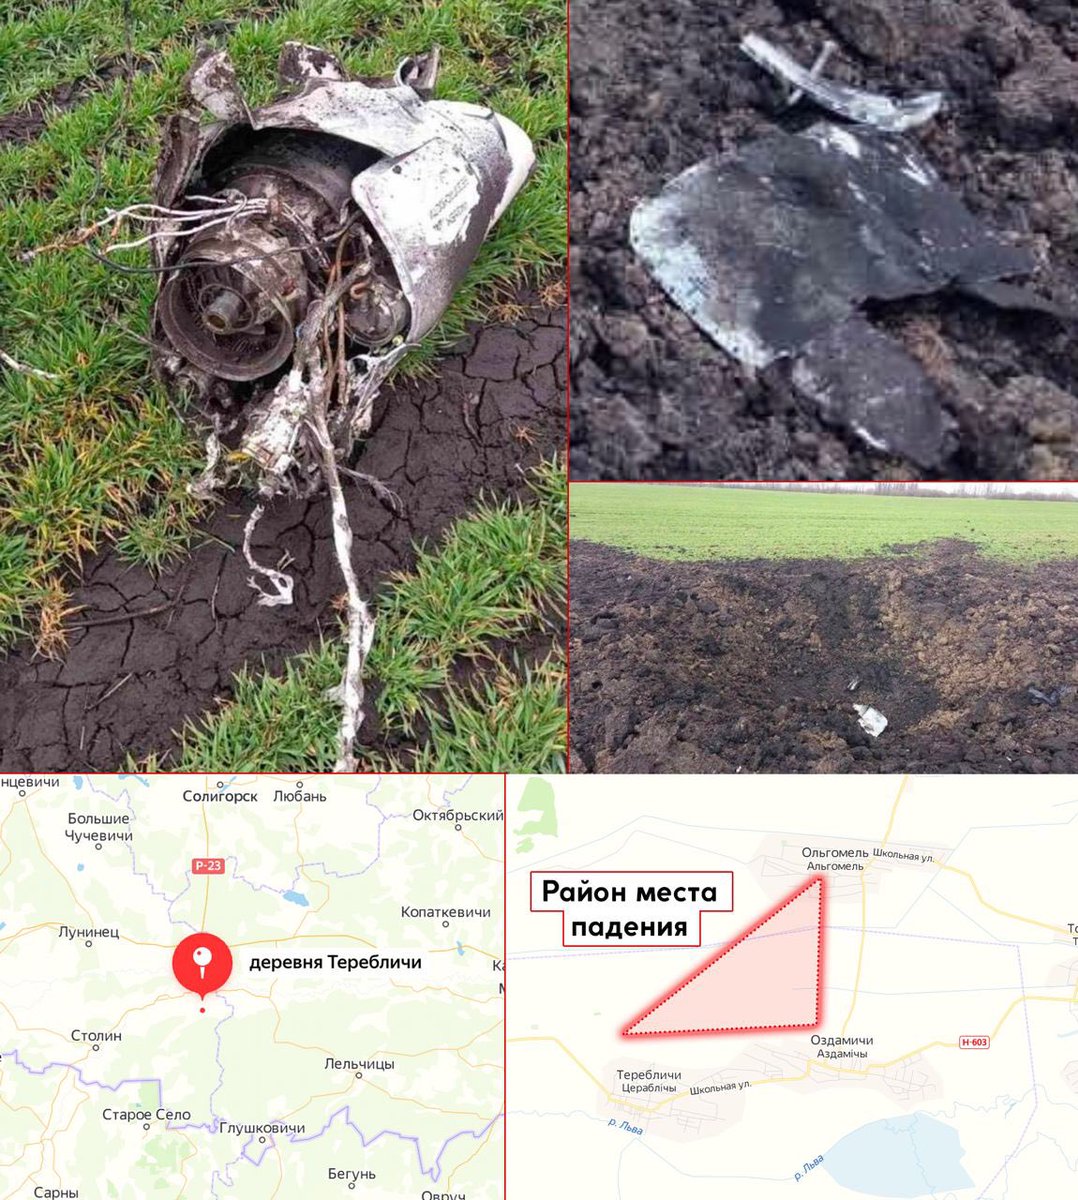 Wreckage of cruise missile was found near David-Haradok, local residents say they heard an explosion. It's known that today after 11:00, residents of Tsiareblichy, Azdamichy and Algomel (Brest region) villages heard a strong rumble, then heard an explosion and saw smoke